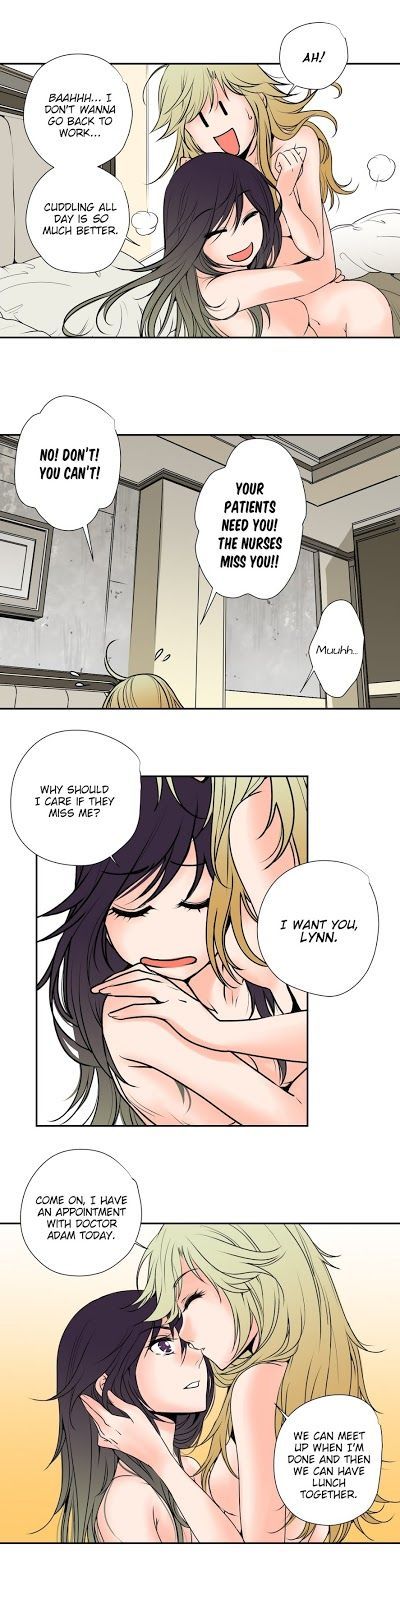 Pulse Chapter 035 page 7